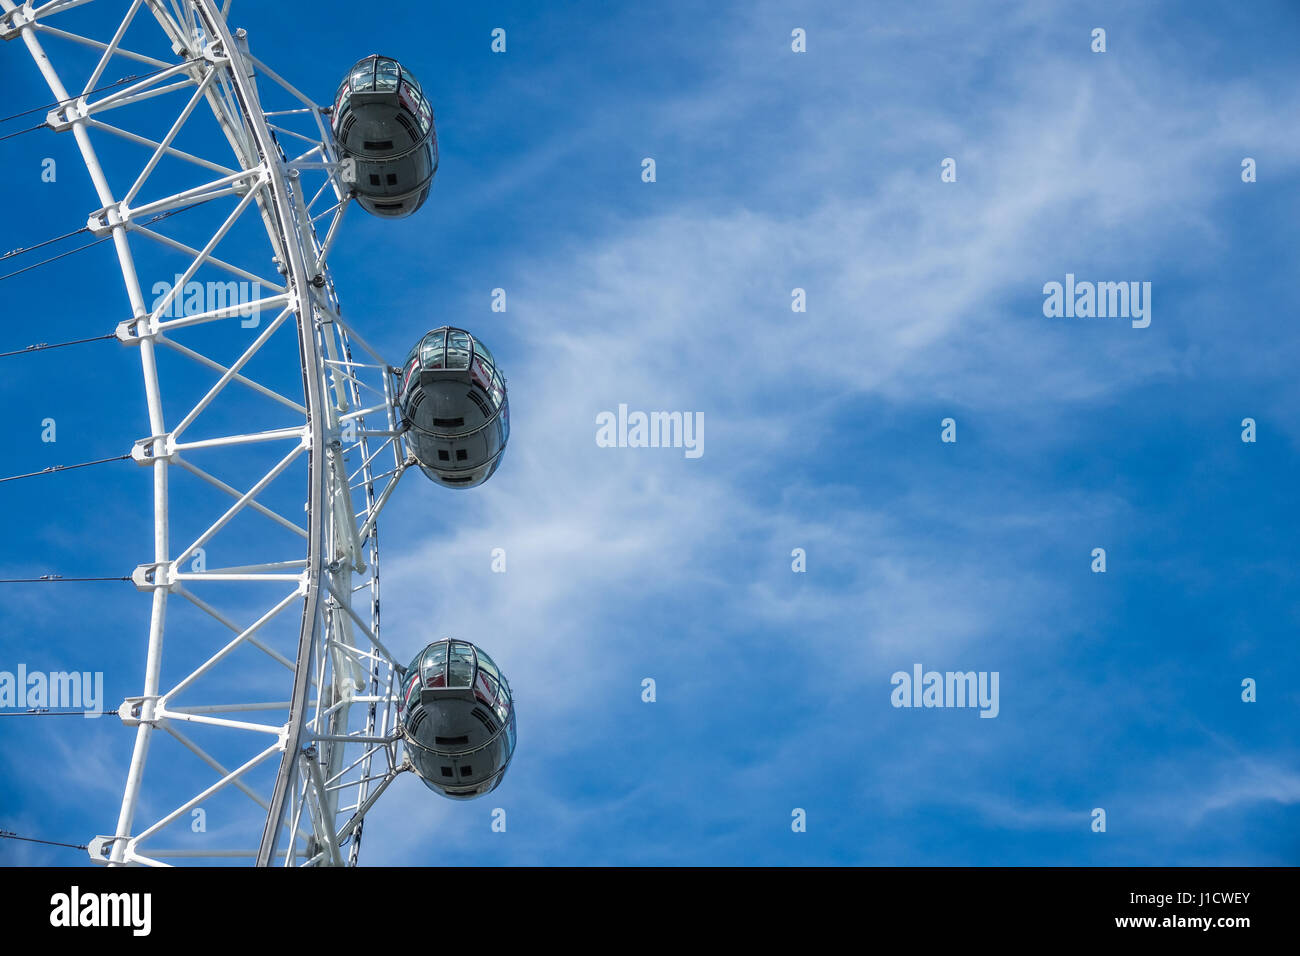 London, England -  25 March 2017 : Passenger capsules on the London Eye, famous London landmark and tourist attraction, UK Stock Photo